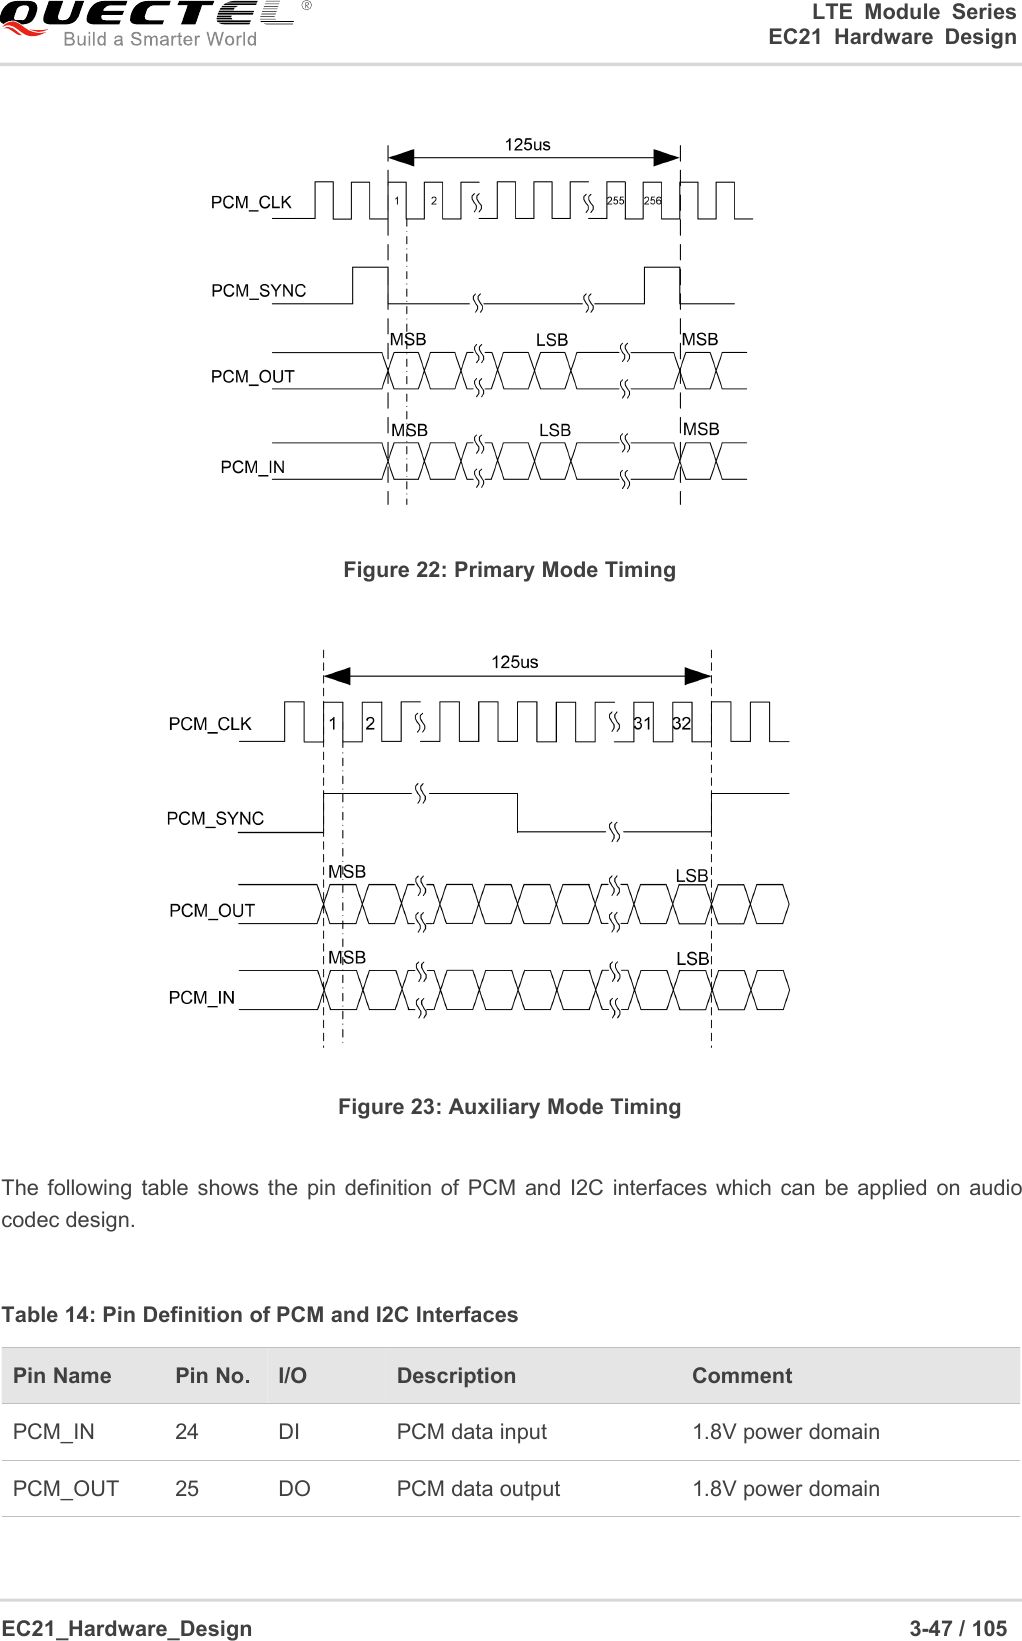 LTE Module SeriesEC21 Hardware DesignEC21_Hardware_Design 3-47 / 105Figure 22: Primary Mode TimingFigure 23: Auxiliary Mode TimingThe following table shows the pin definition of PCM and I2C interfaces which can be applied on audiocodec design.Table 14: Pin Definition of PCM and I2C InterfacesPin NamePin No.I/ODescriptionCommentPCM_IN24DIPCM data input1.8V power domainPCM_OUT25DOPCM data output1.8V power domain